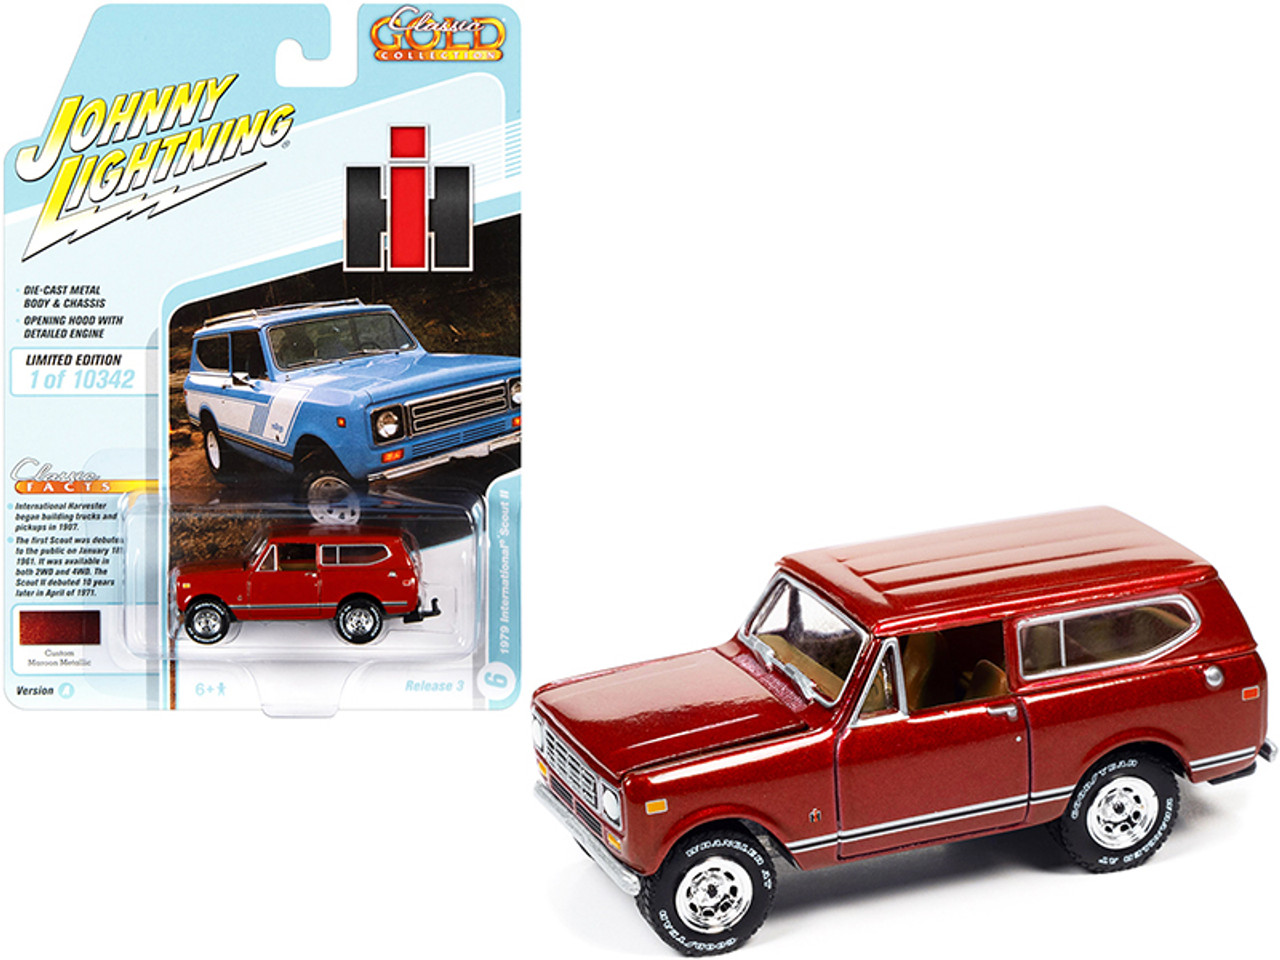 1979 International Scout II Custom Maroon Metallic with Side Stripes "Classic Gold Collection" Series Limited Edition to 10342 pieces Worldwide 1/64 Diecast Model Car by Johnny Lightning